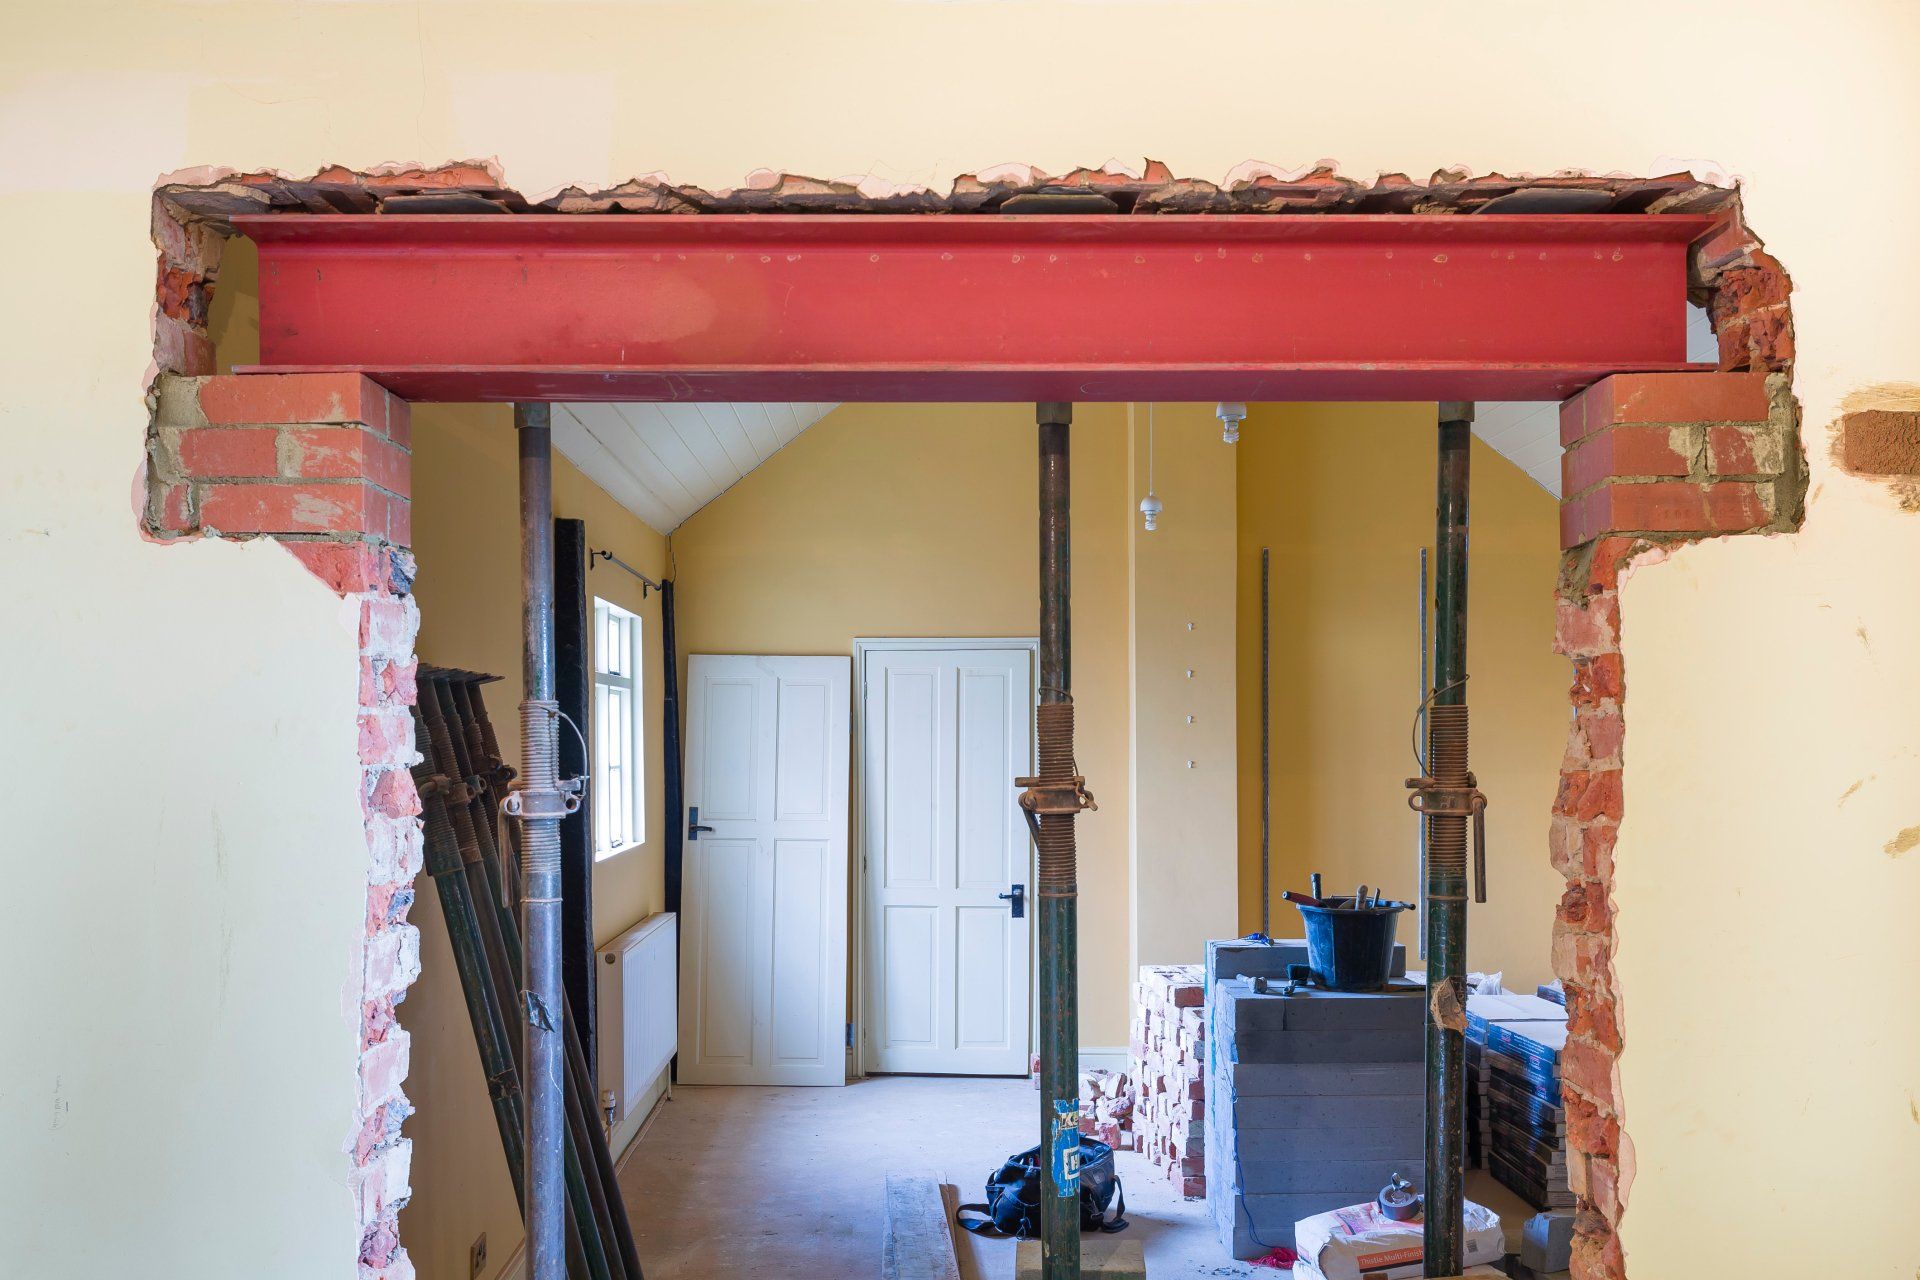 Wall removal in perth and other ways to extend and renovate your property